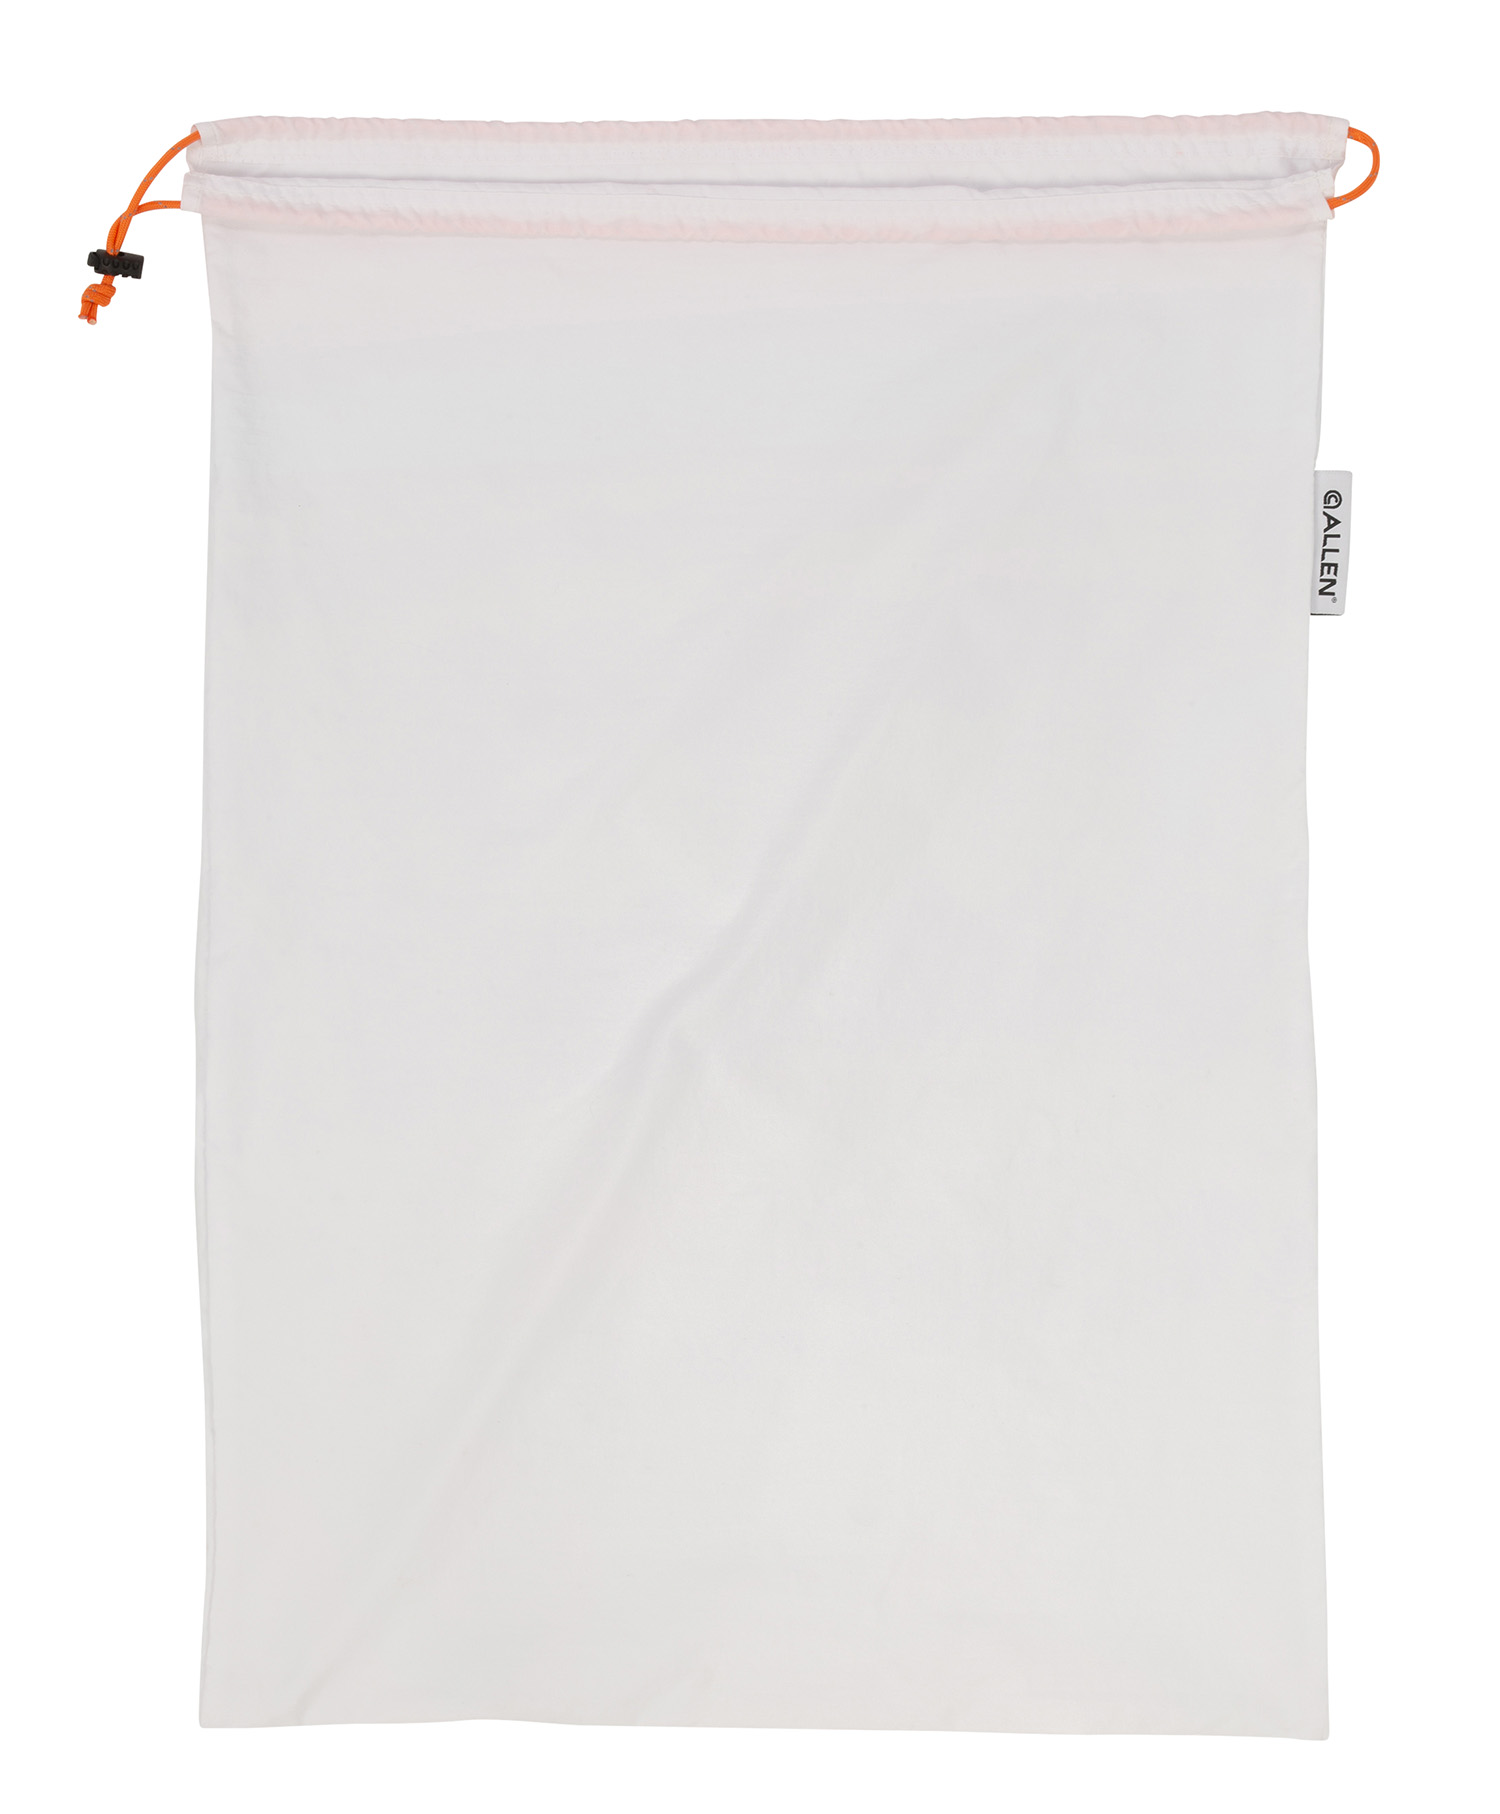 Allen 6593 BackCountry Single Meat Game Bag White Polyester